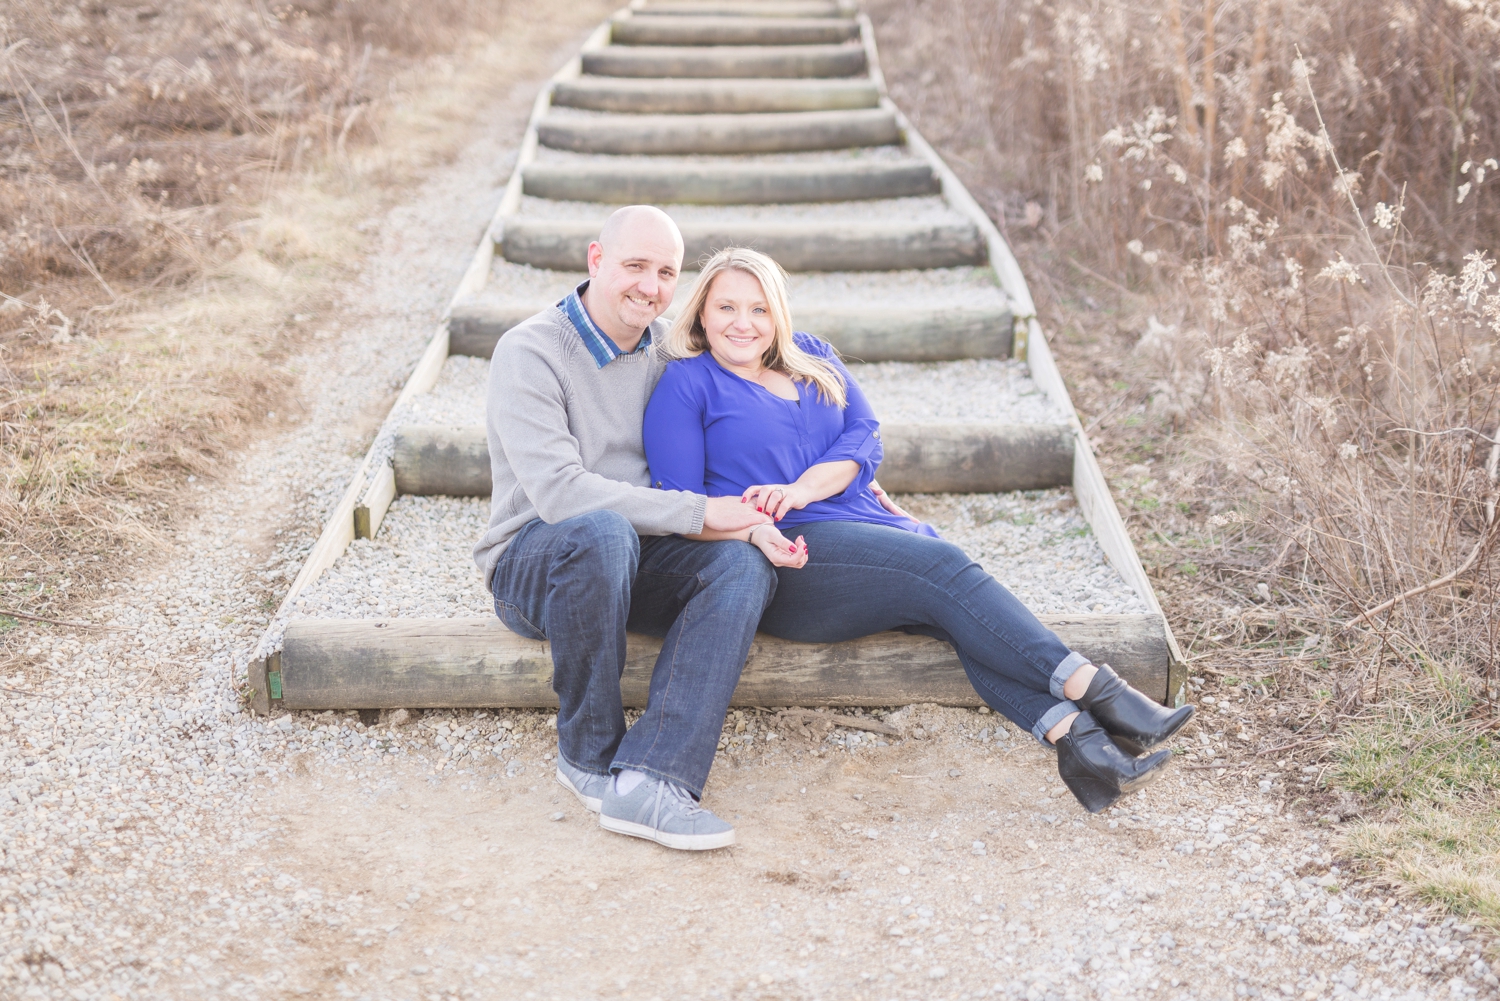 winter-engaged-couple-at-their-photo-session-at-the-scioto-audubon-park-near-grange-audubon-center-with-walkways-and-grass_0336